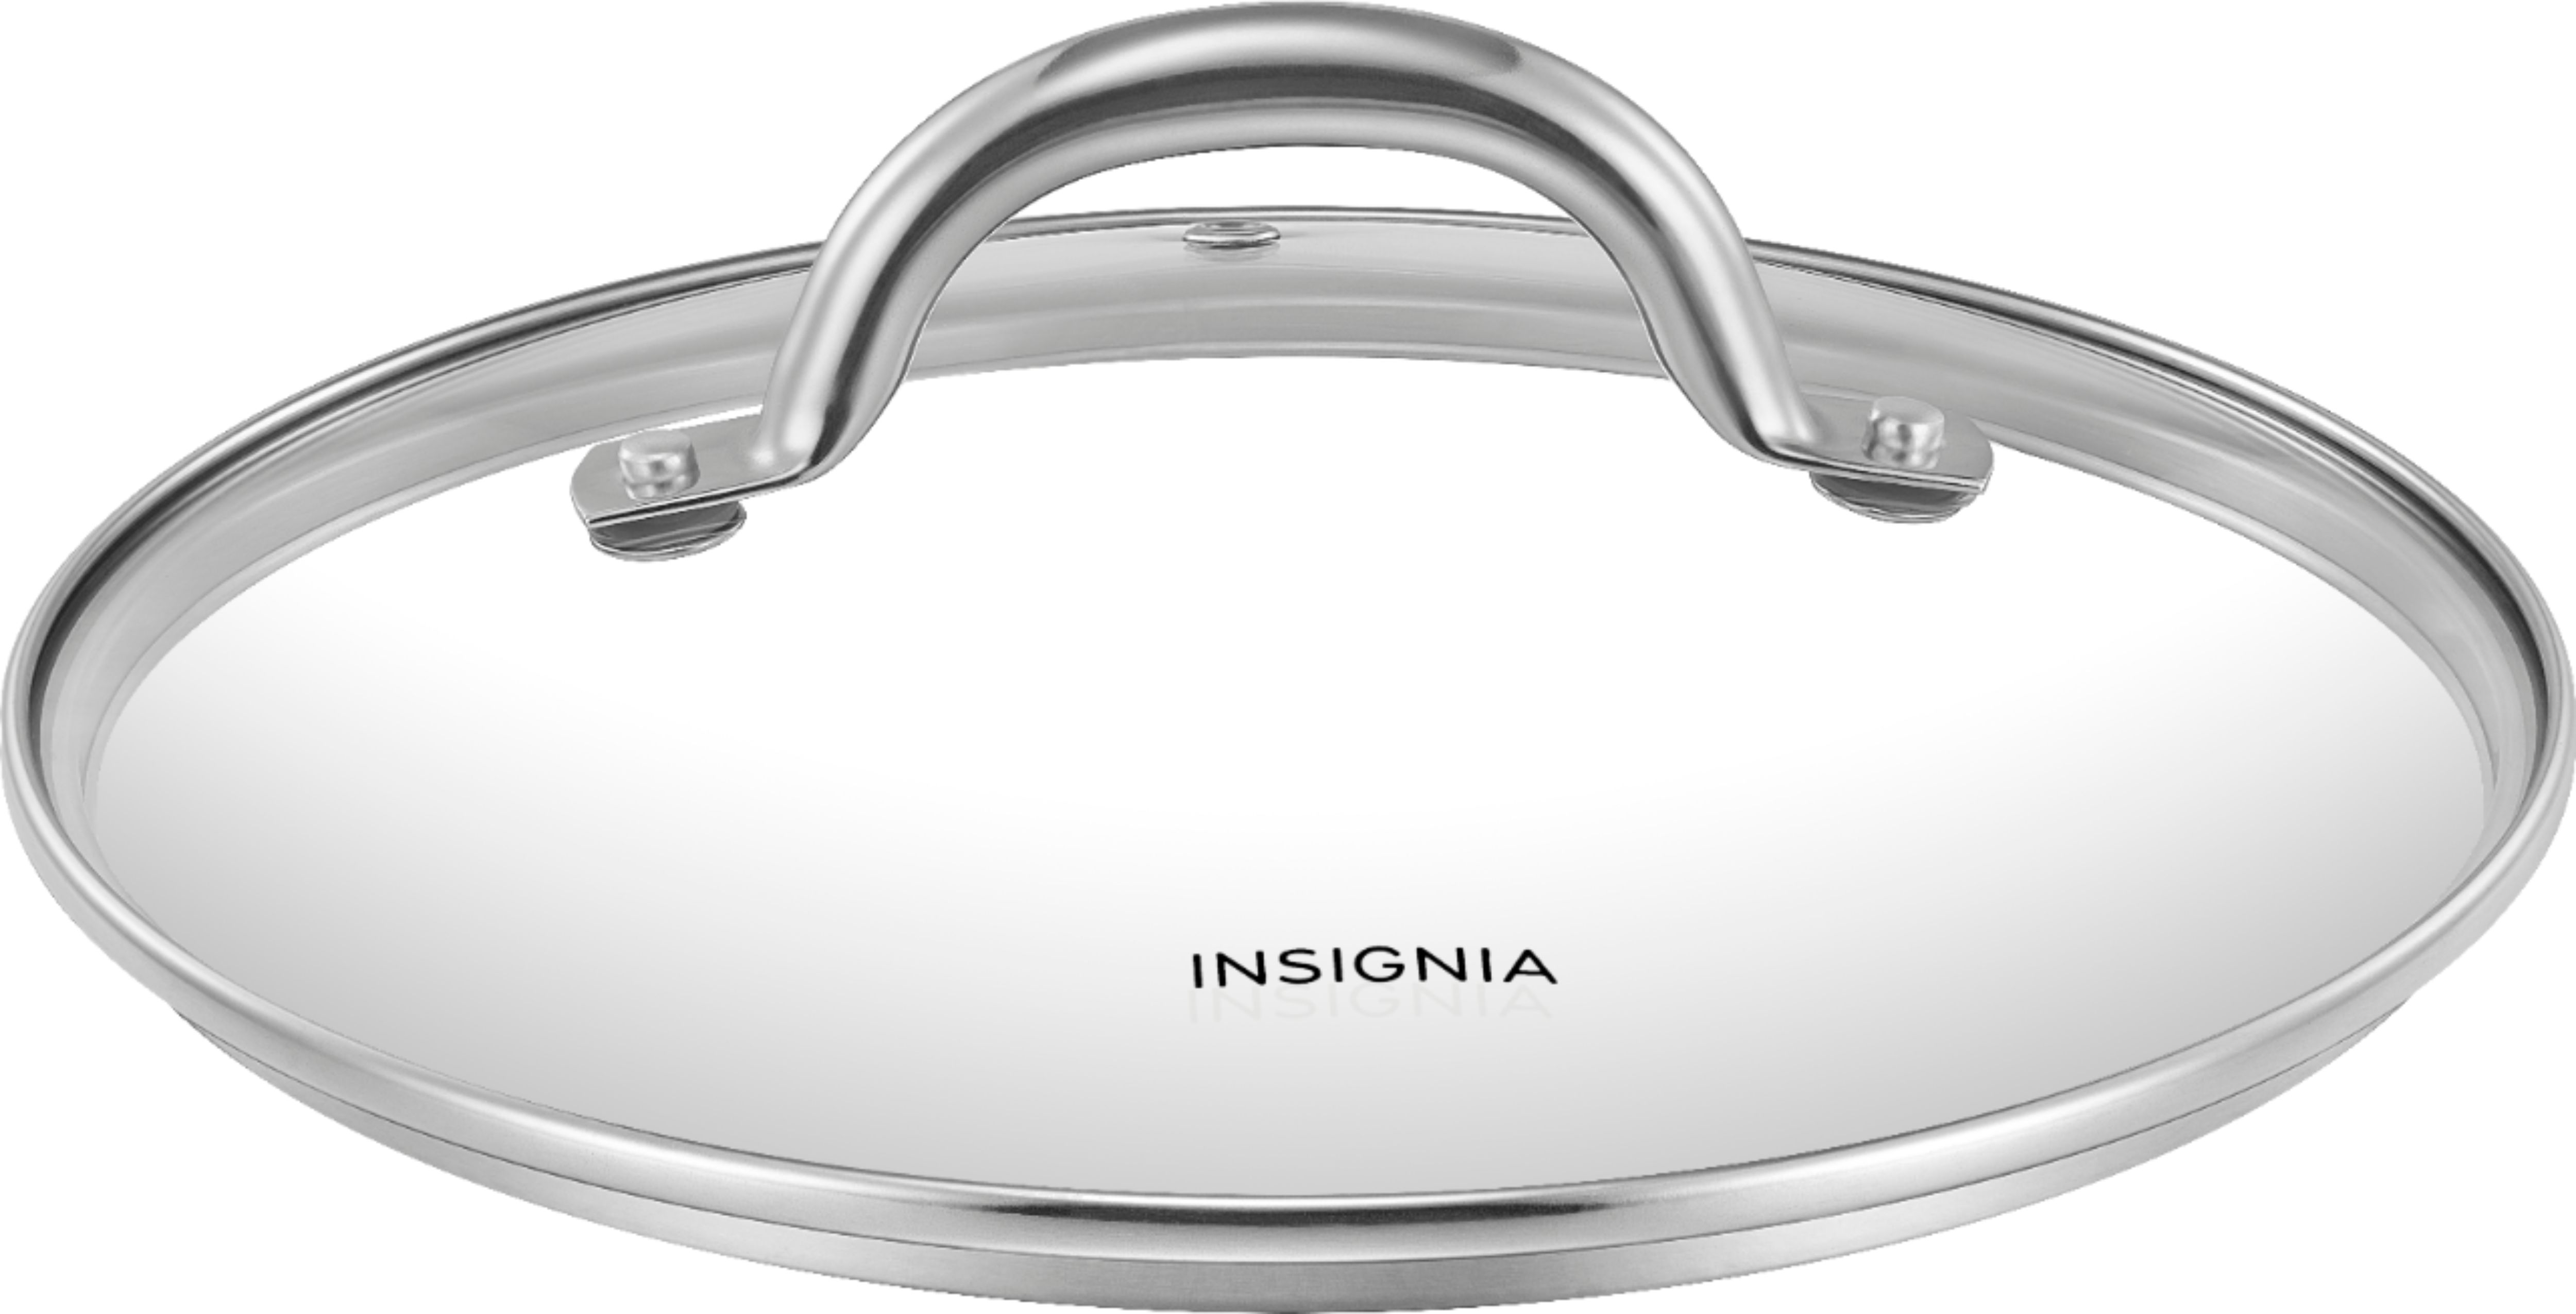 Insignia™ 9 Glass Lid for 6 Qt Multi-Cooker Clear NS-MCGL6CL9